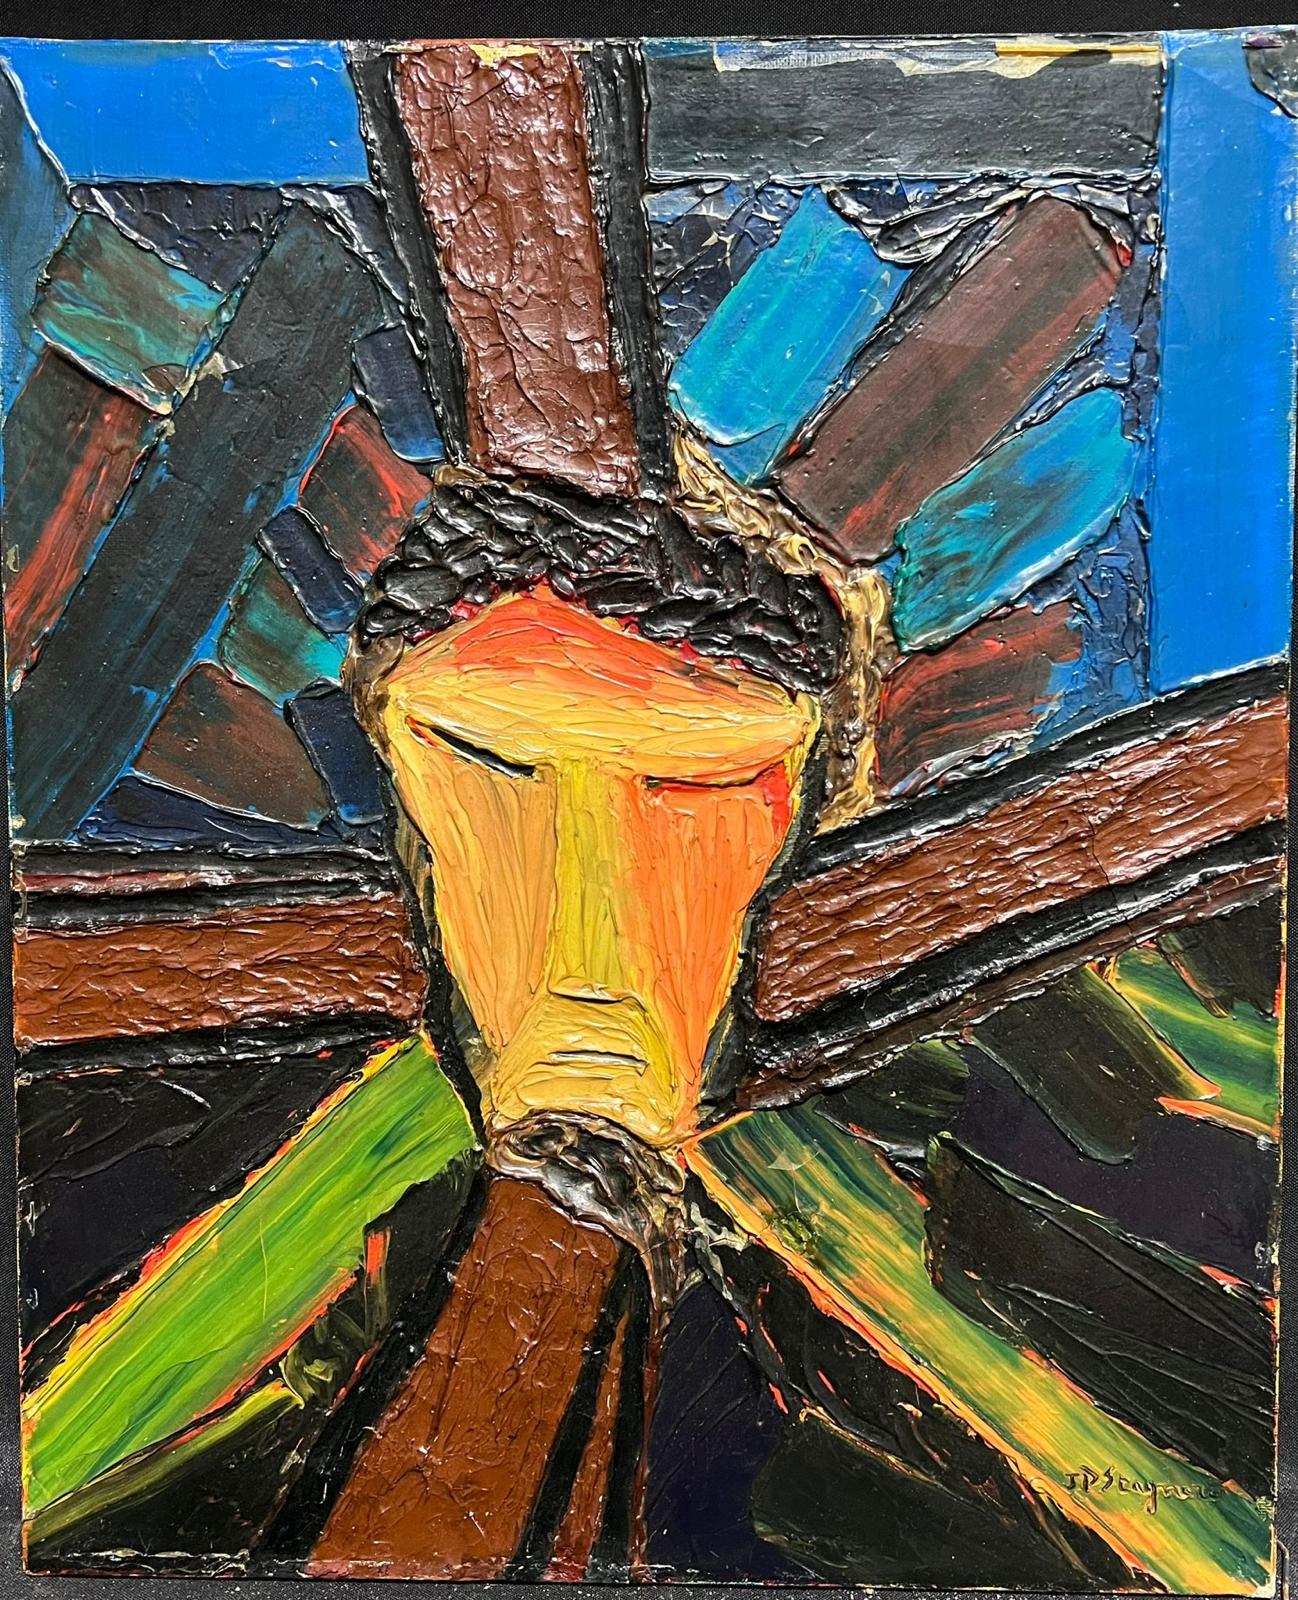 Christ (The Crucifixion)
by Jean Pierre Stagnaro (French, 1960's)
signed, titled and dated verso
oil on canvas, unframed
canvas: 18 x 15 inches
provenance: private collection, France
condition: a few minor scuffs but overall good and sound condition 